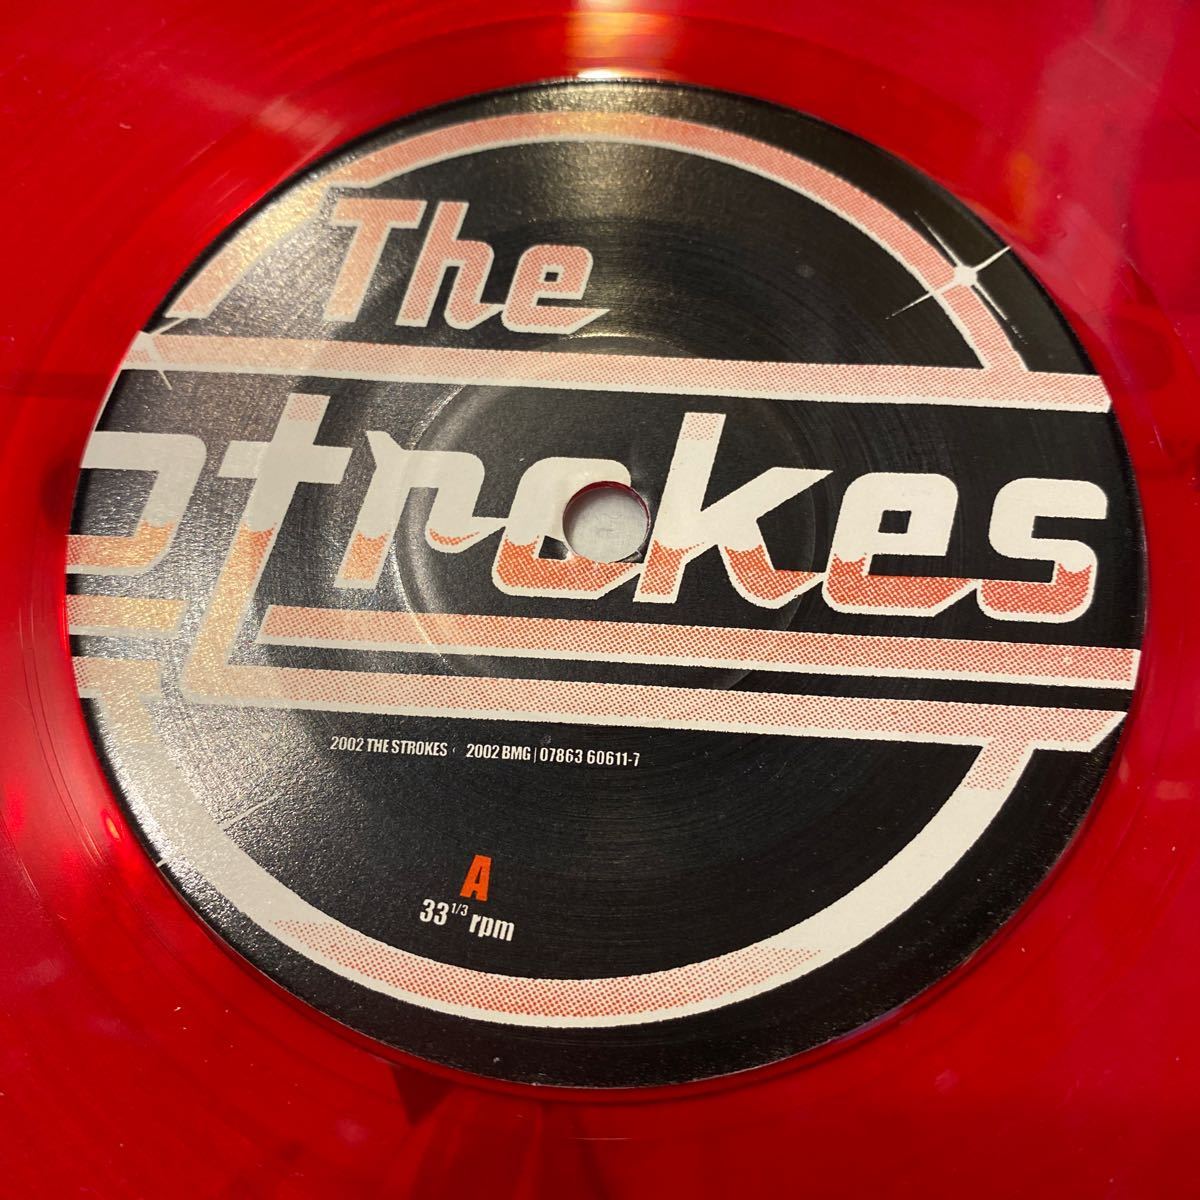 EP-002 THE STROKES /ザ ストロークス /希少 EP / LAST NITE 赤盤 LIMITED EDITION / 2枚セット_画像5